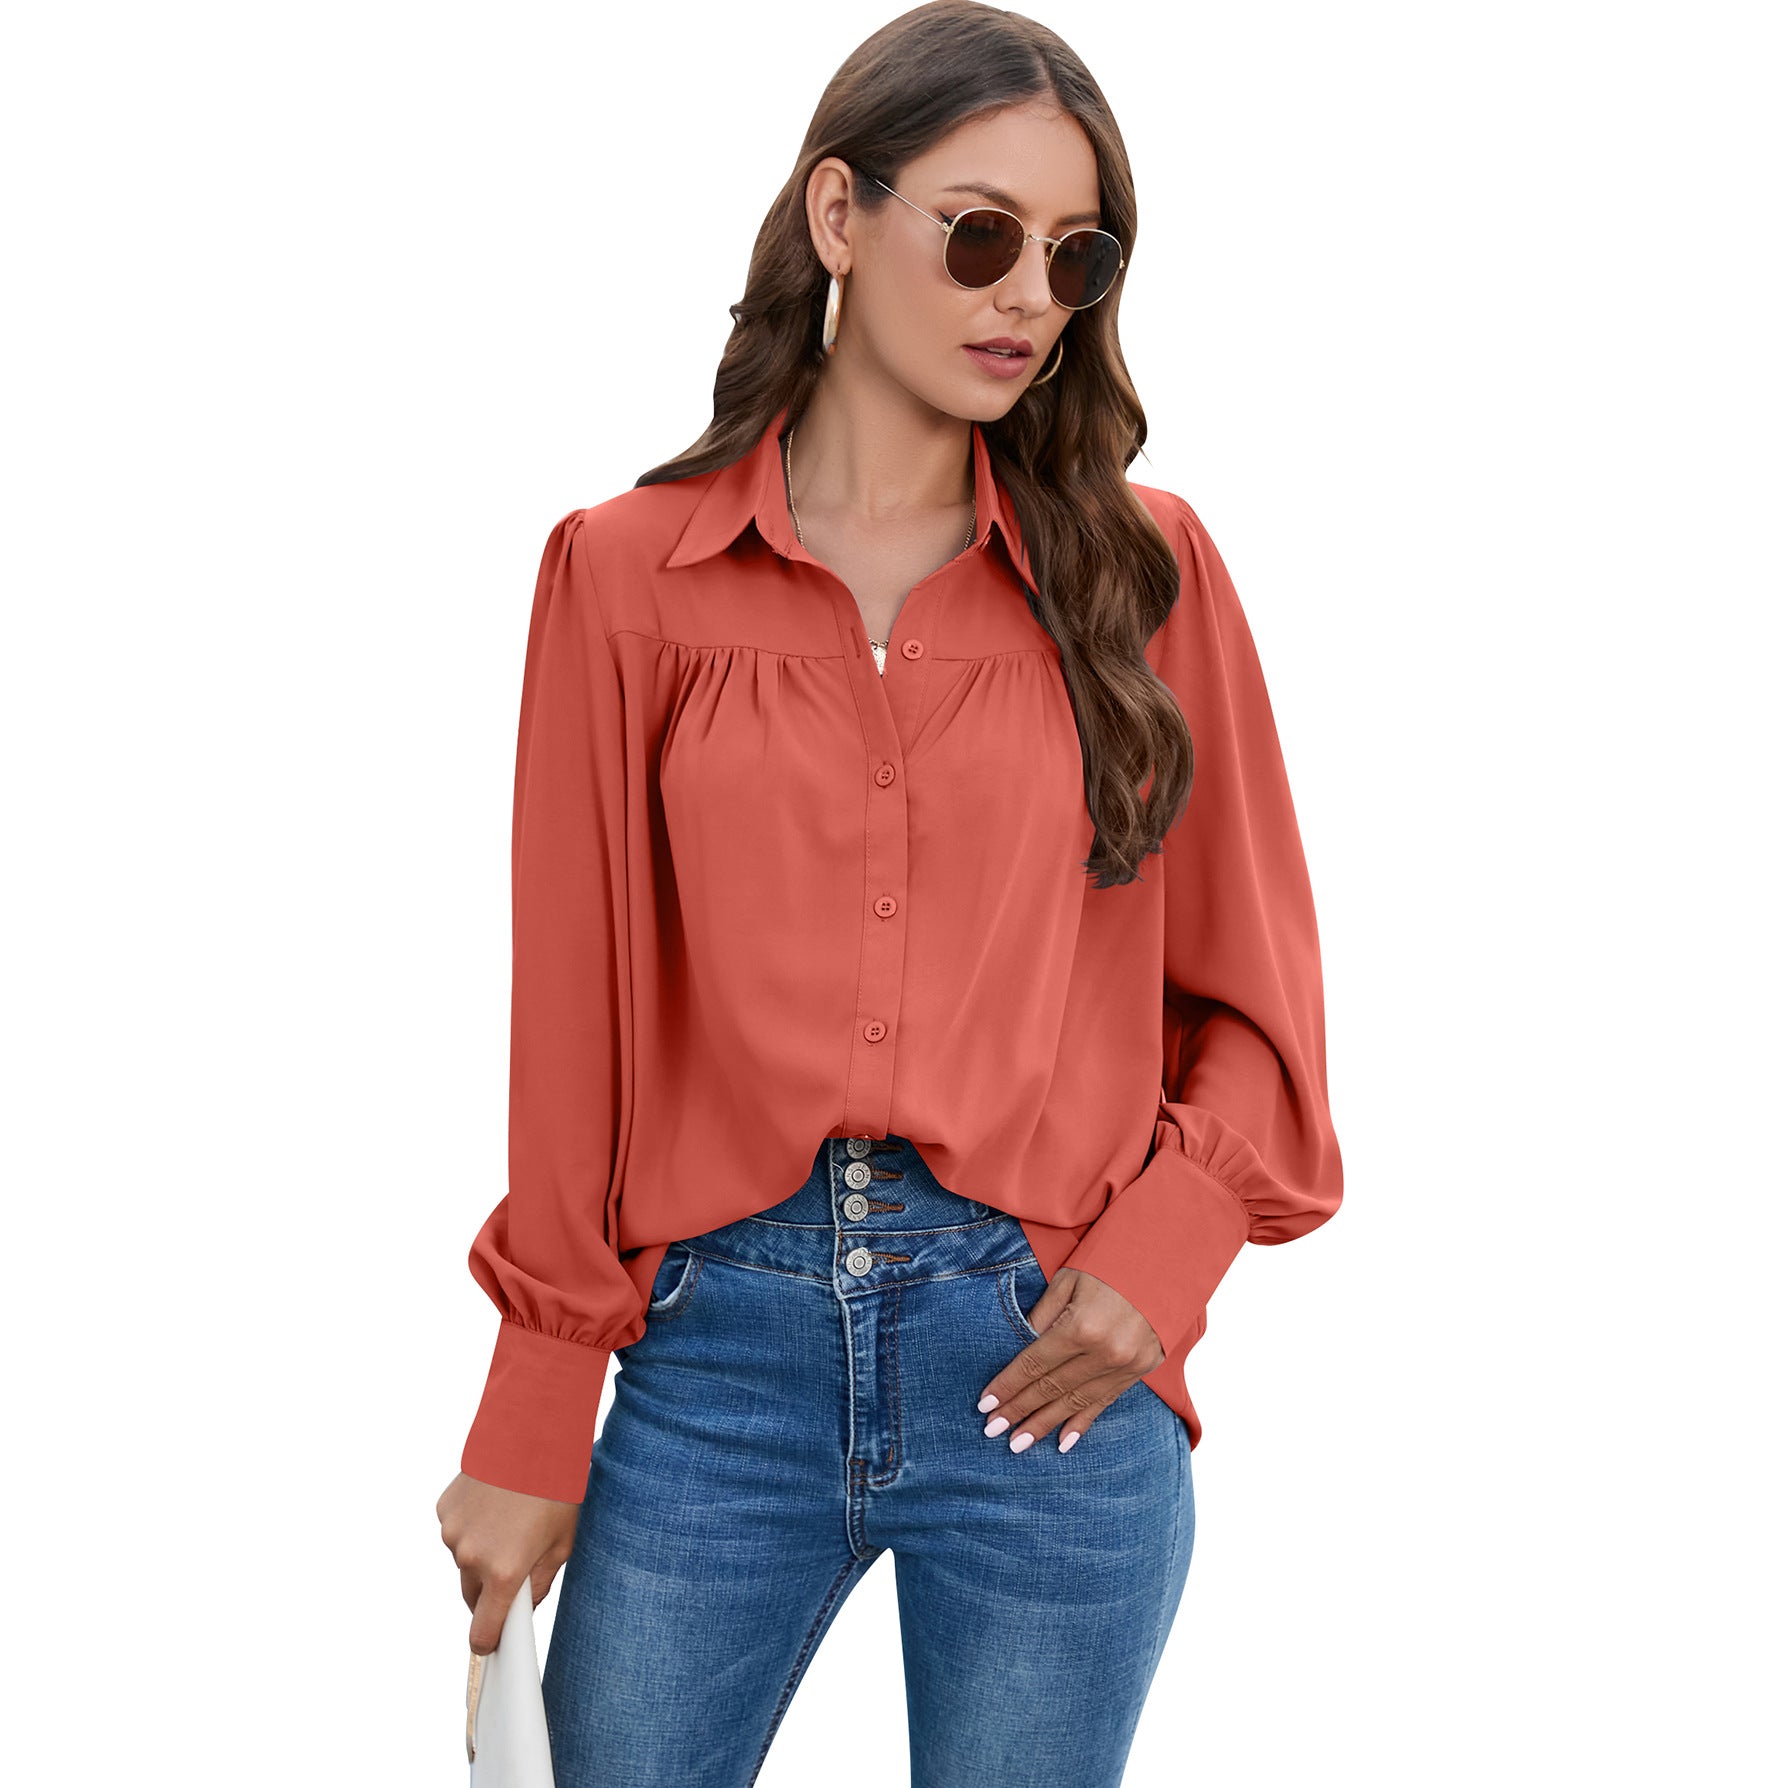 Women's Fashion Charming Classy Pleated Long-sleeved Shirts Blouses